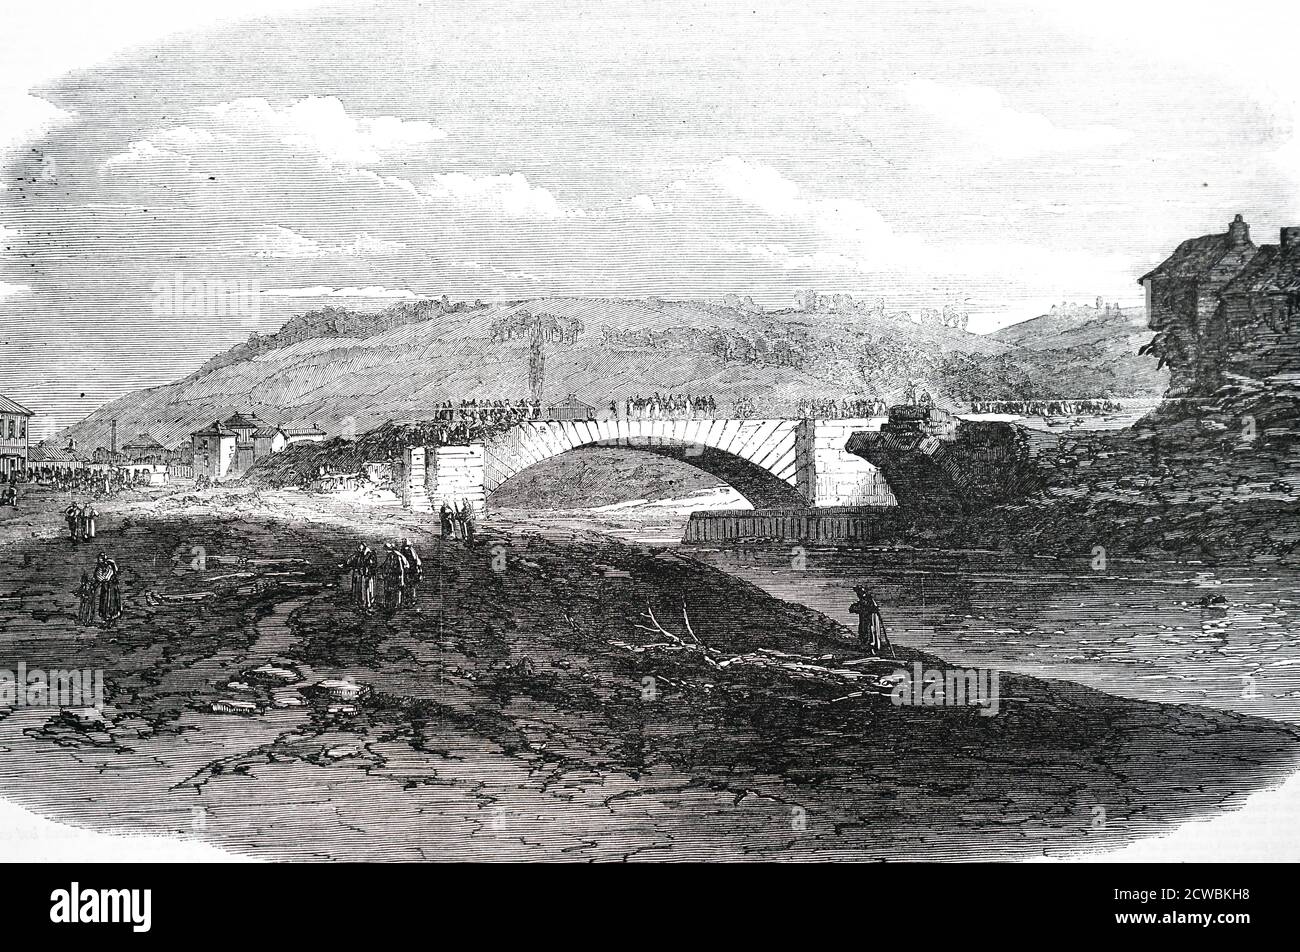 Engraving depicting the aftermath of the flooding of Sheffield and its environs due to failure of the Dale Dyke of the Bradfield Reservoir: 11 March 1864. There was extensive damage and loss of life. The village of Hillsborough after the flood. Stock Photo